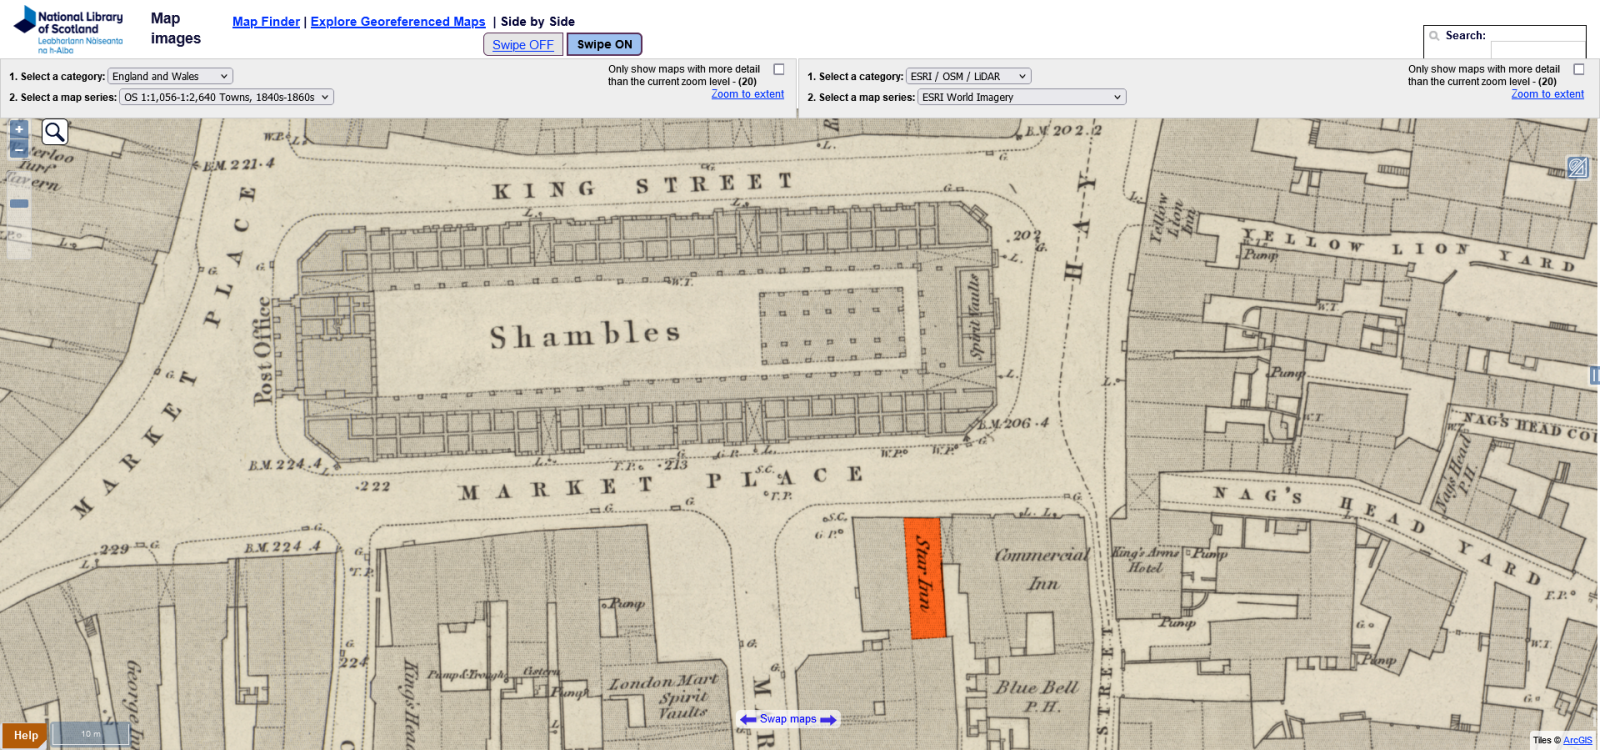 Screenshot 2022-12-30 at 07-23-10 Side by side georeferenced maps viewer with layer swipe - Map images - National Library of Scotland.png